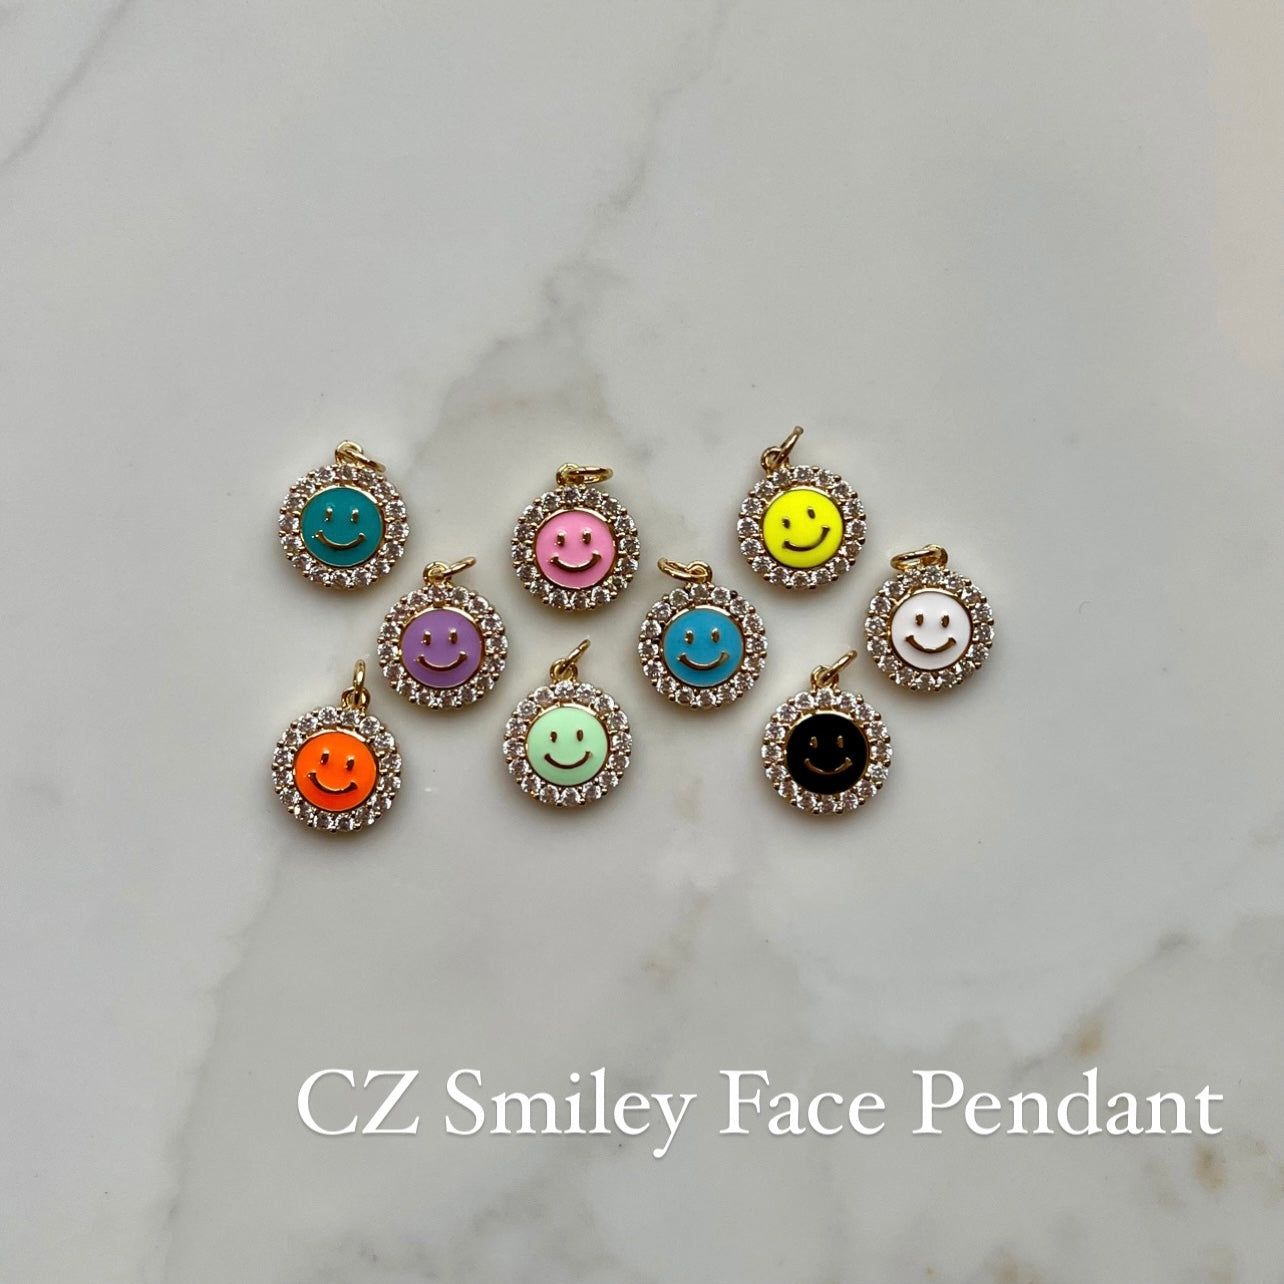 CZ Smiley Face Pendant for the Necklace Kit